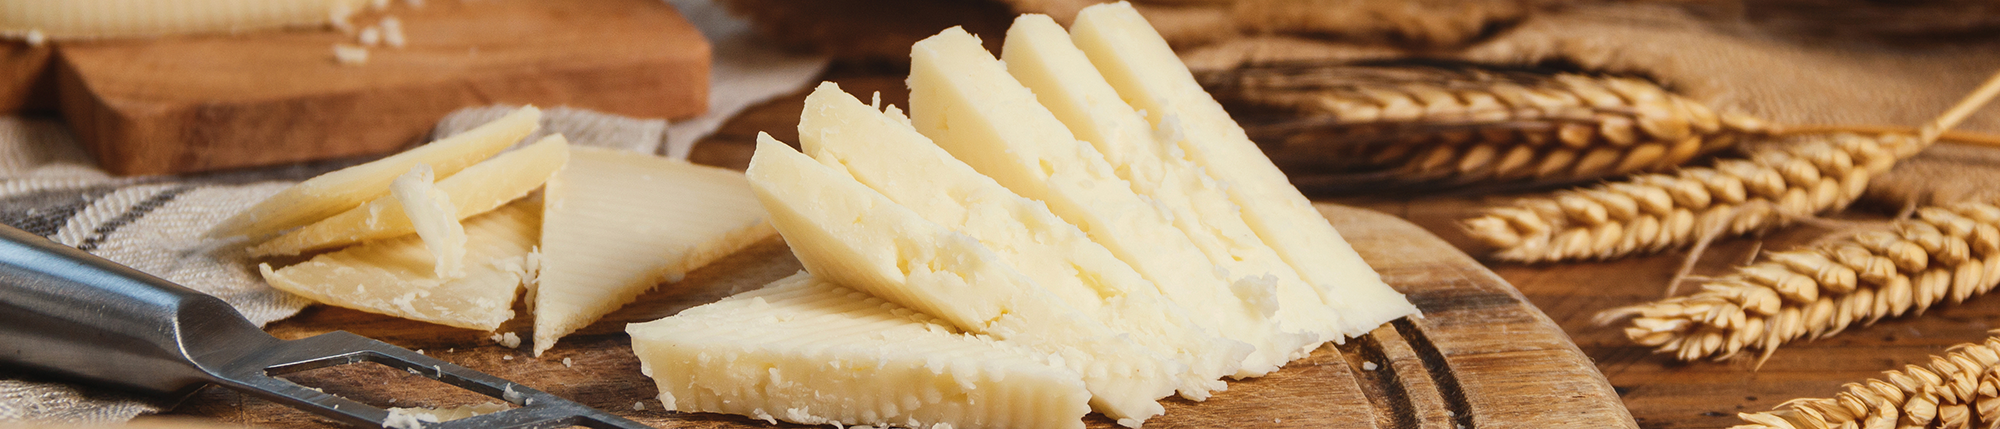 Pecorino and Other Cheese (Italy) - ParmaShop.com